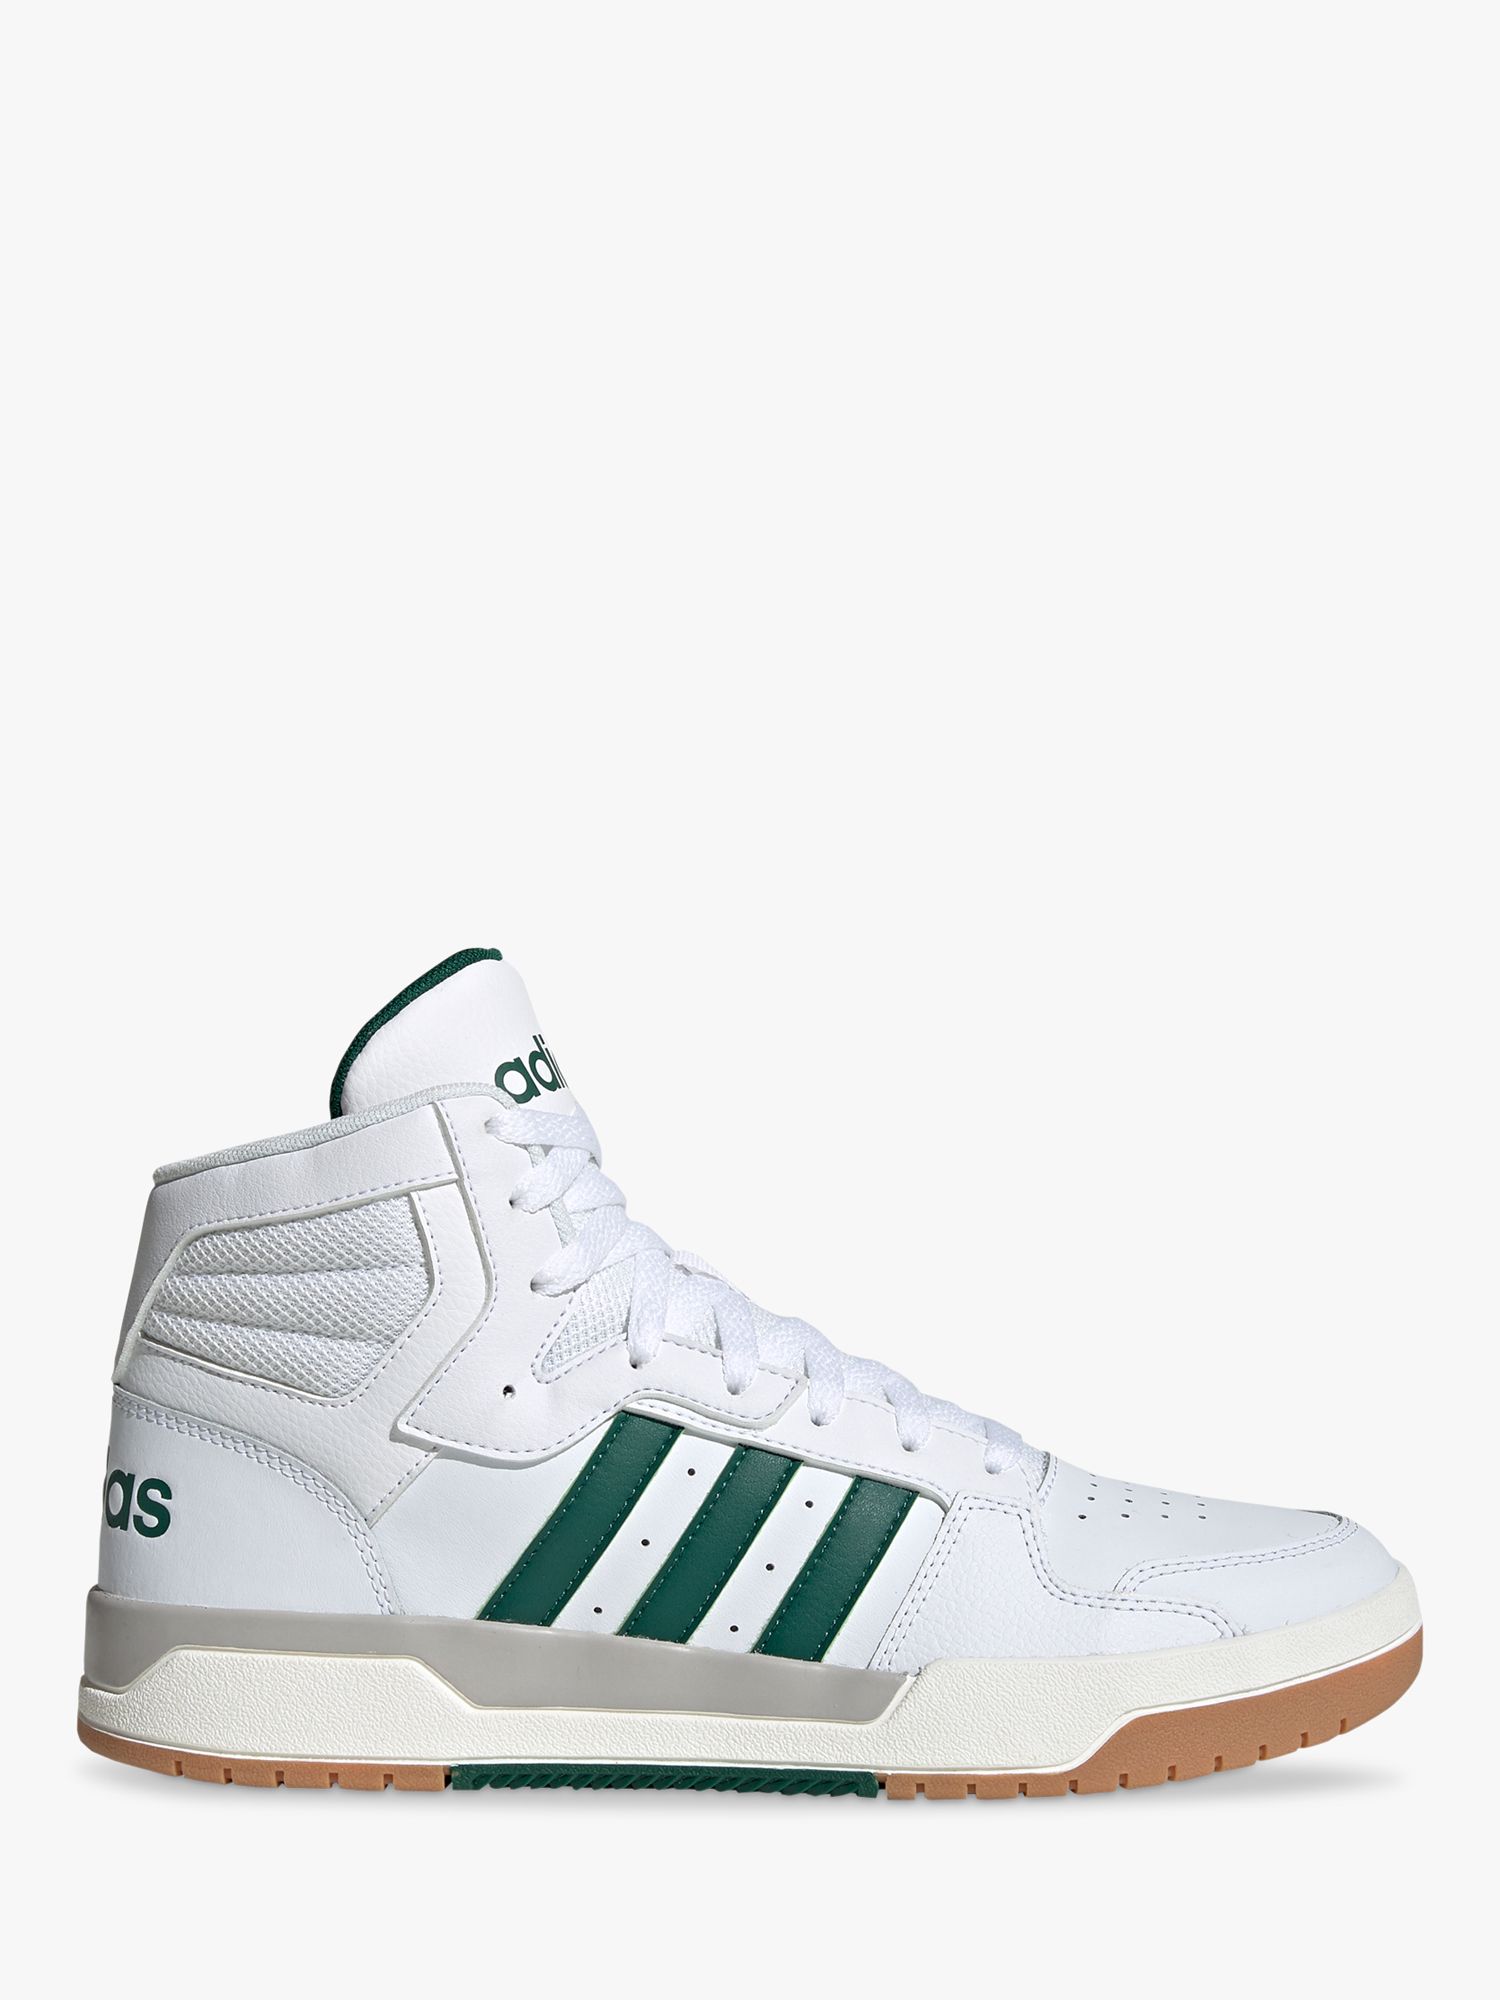 adidas Entrap Mid Leather Lace Up 